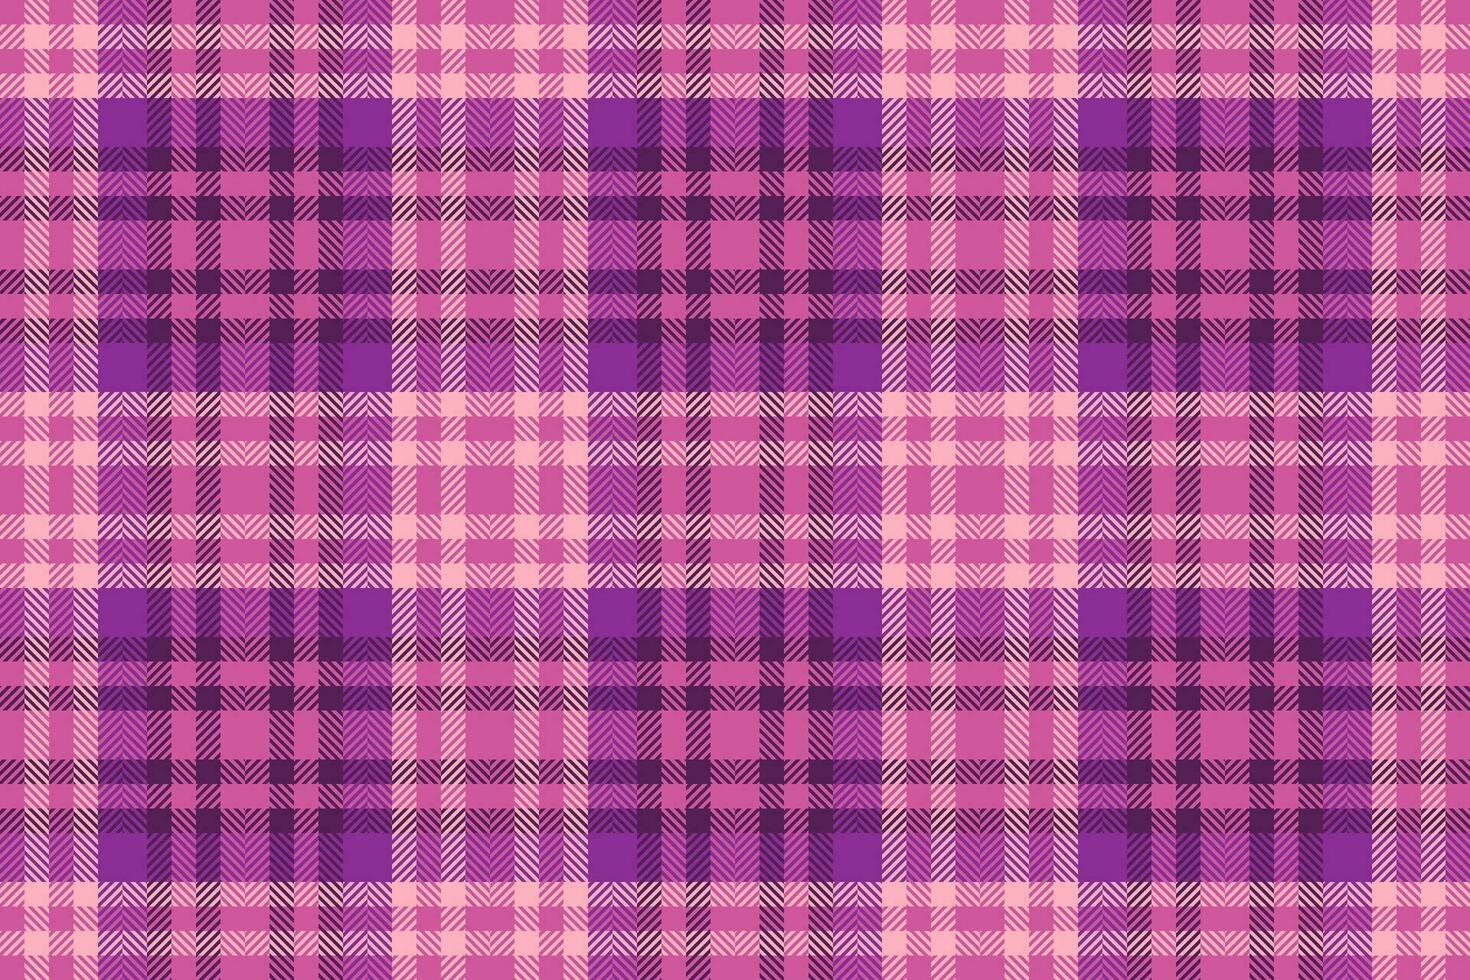 Plaid vector pattern of seamless textile texture with a tartan background check fabric.